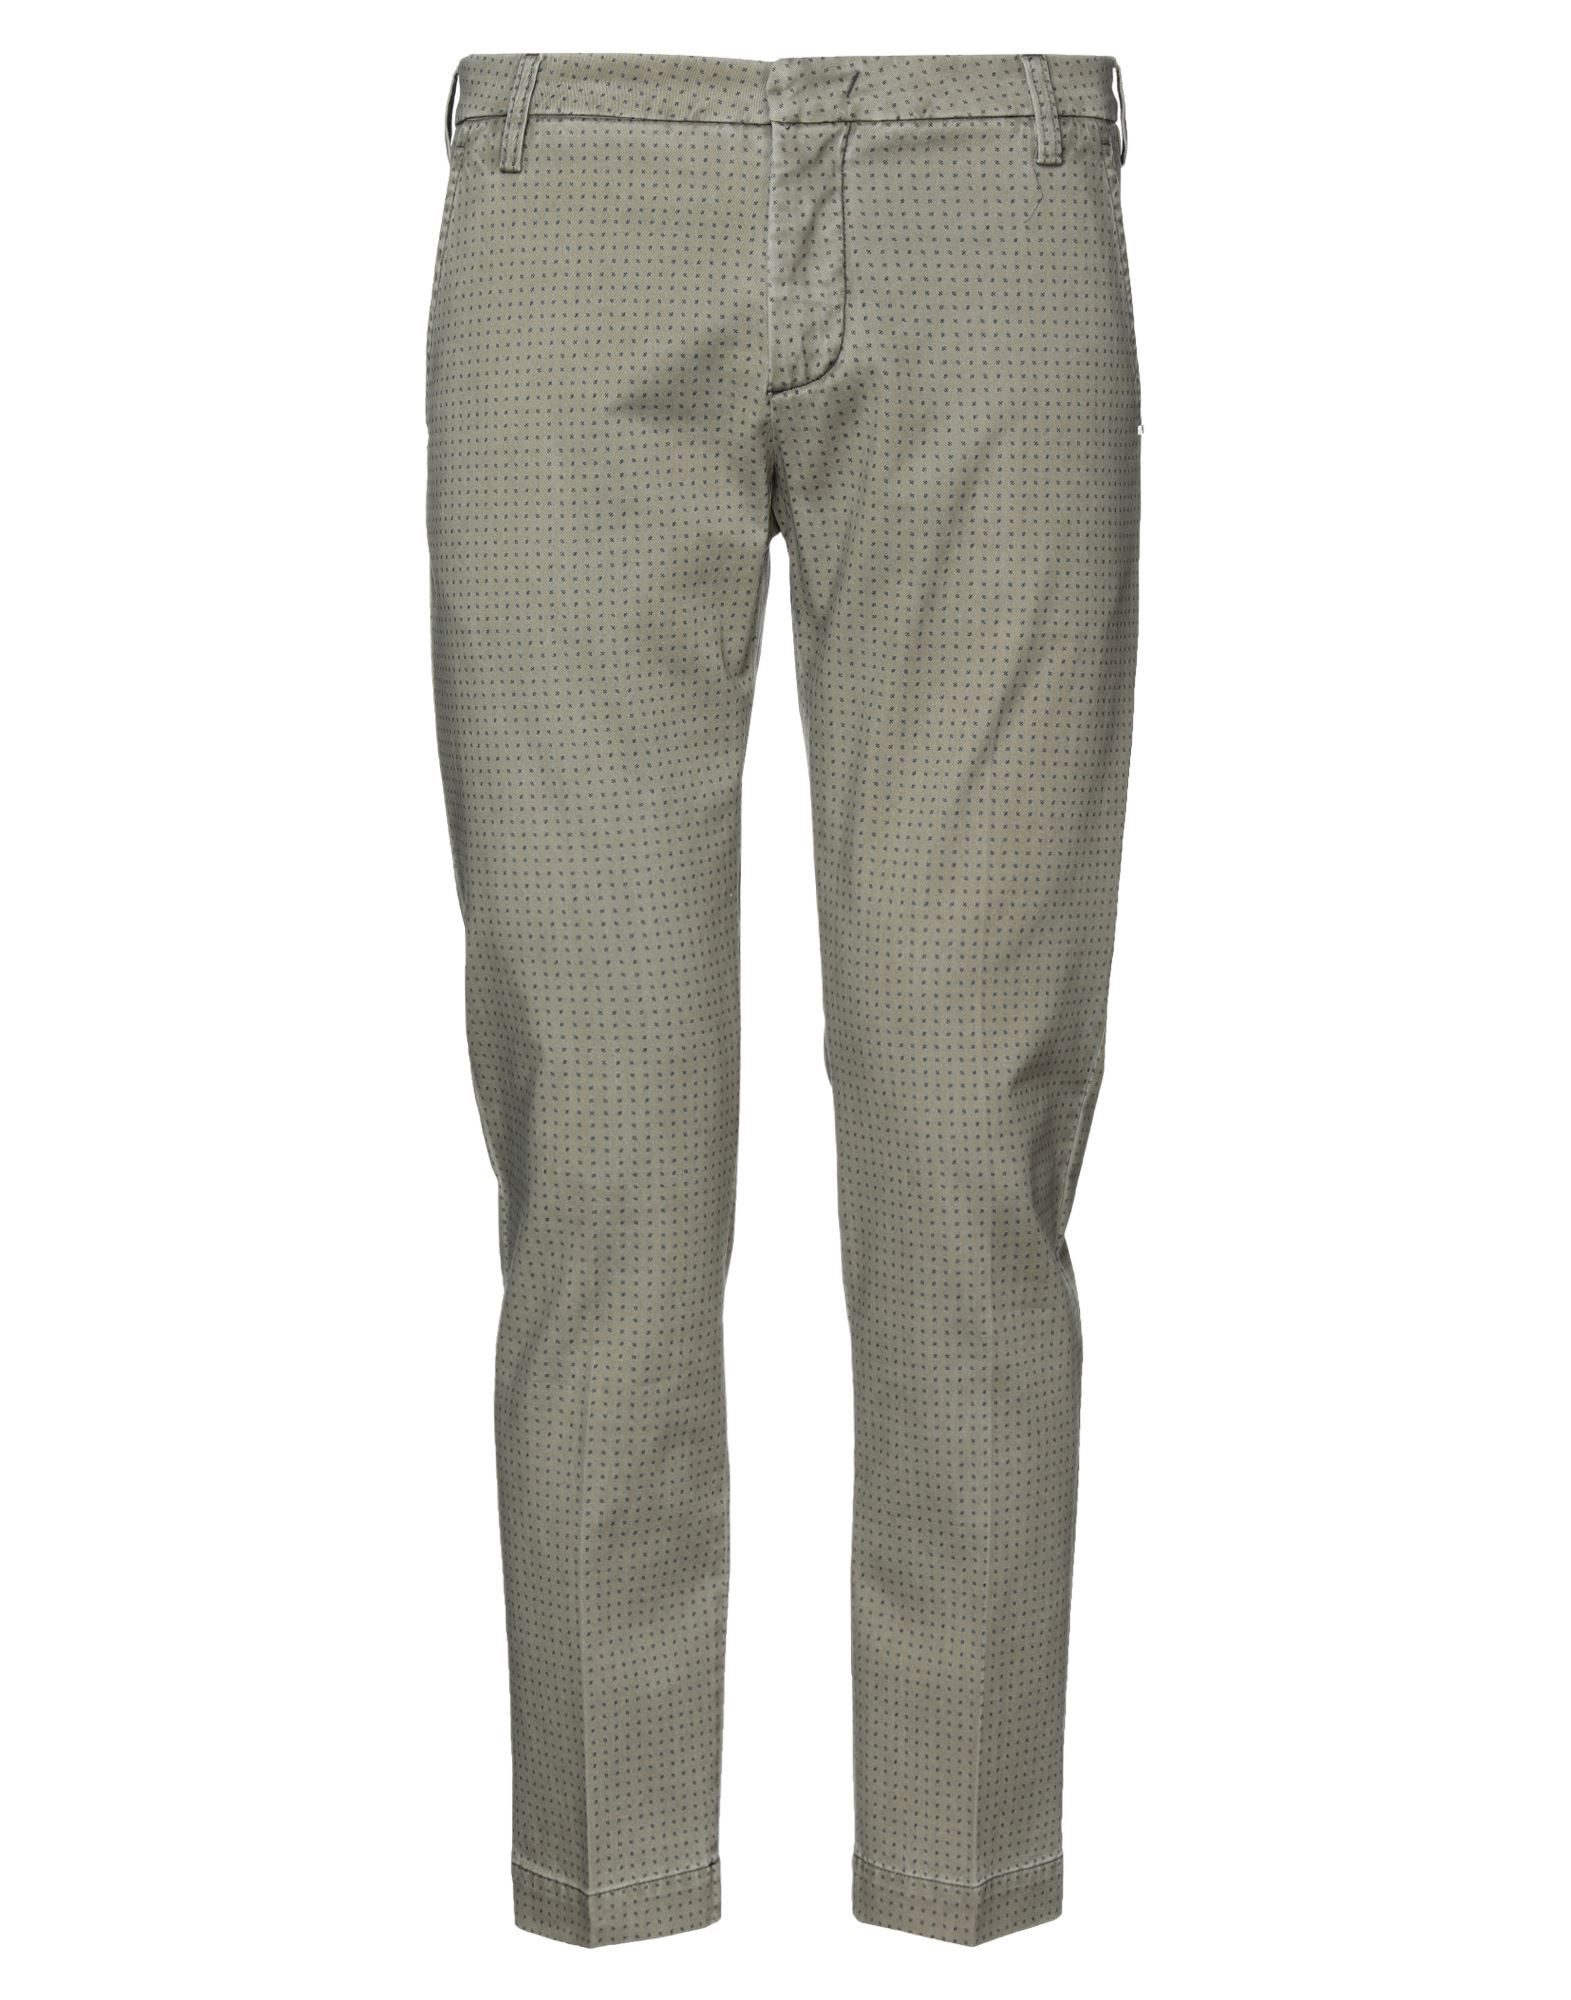 Entre Amis Pants In Sage Green